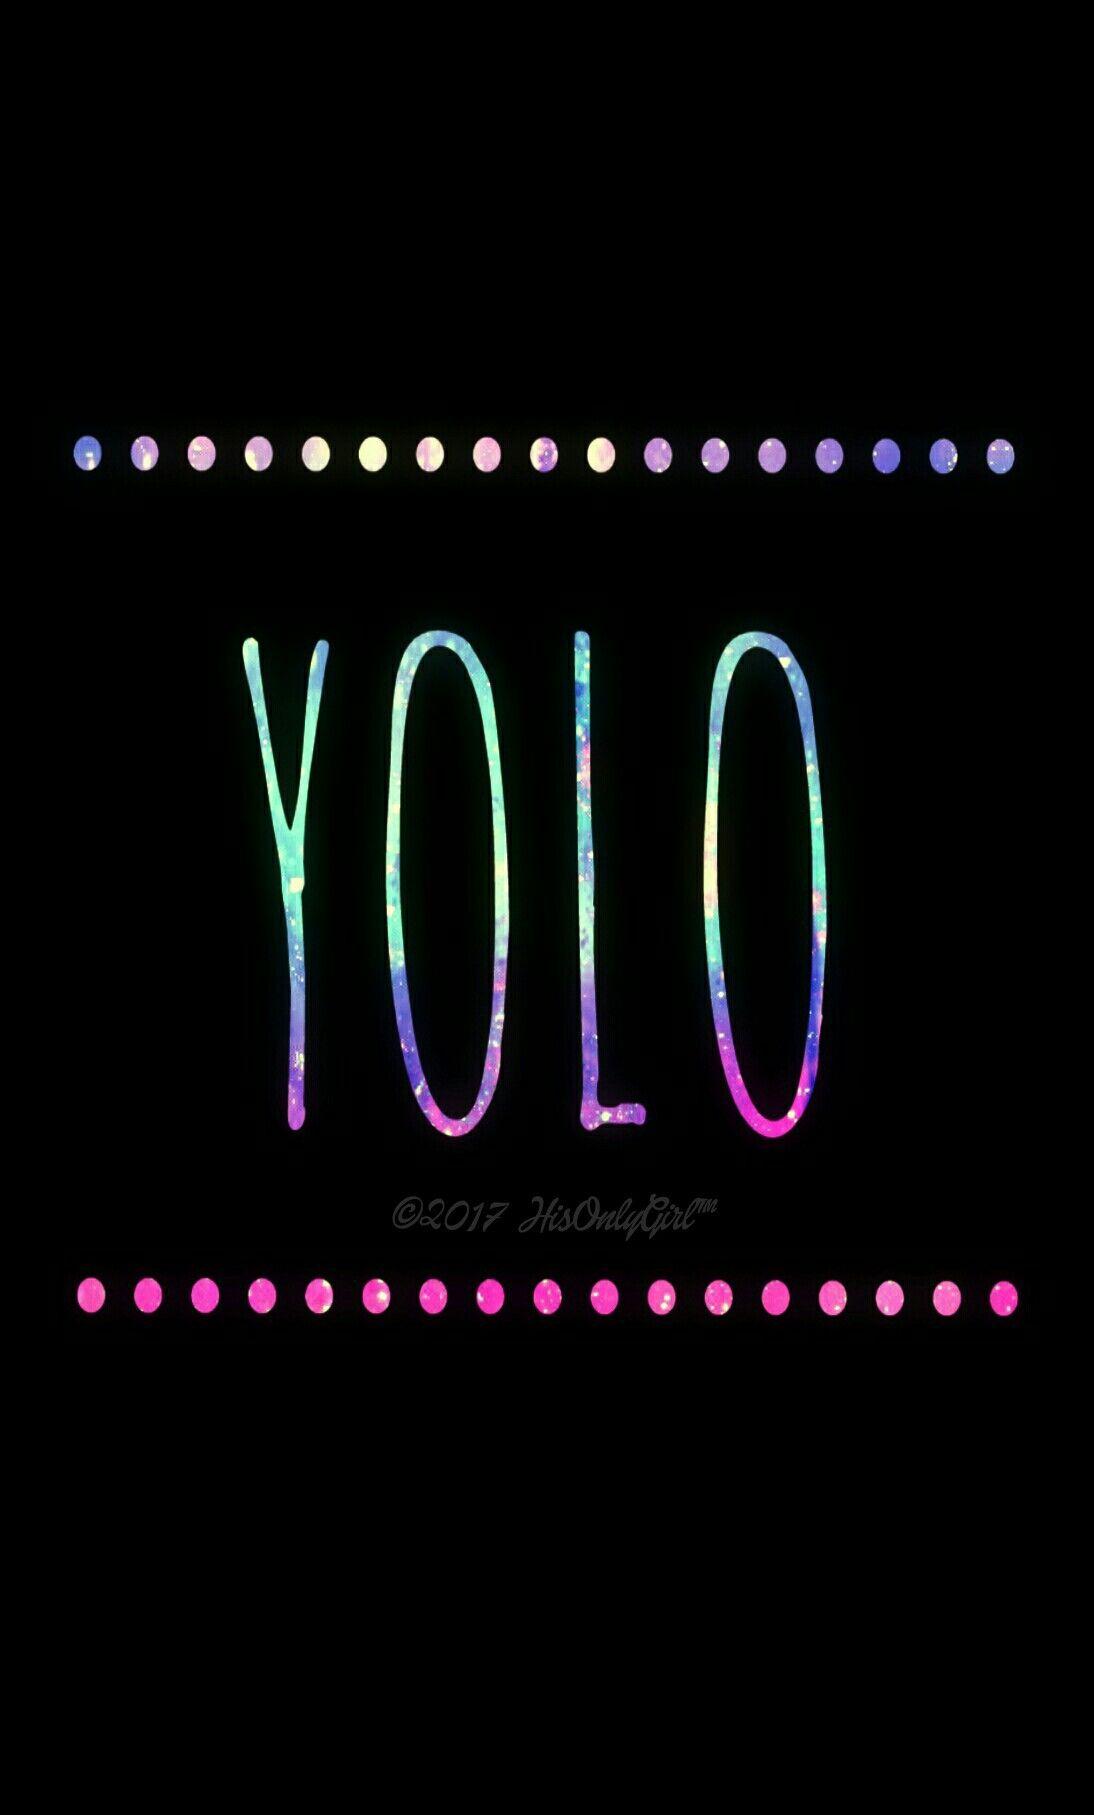 YOLO galaxy wallpaper I created for the app CocoPPa!. Blesk